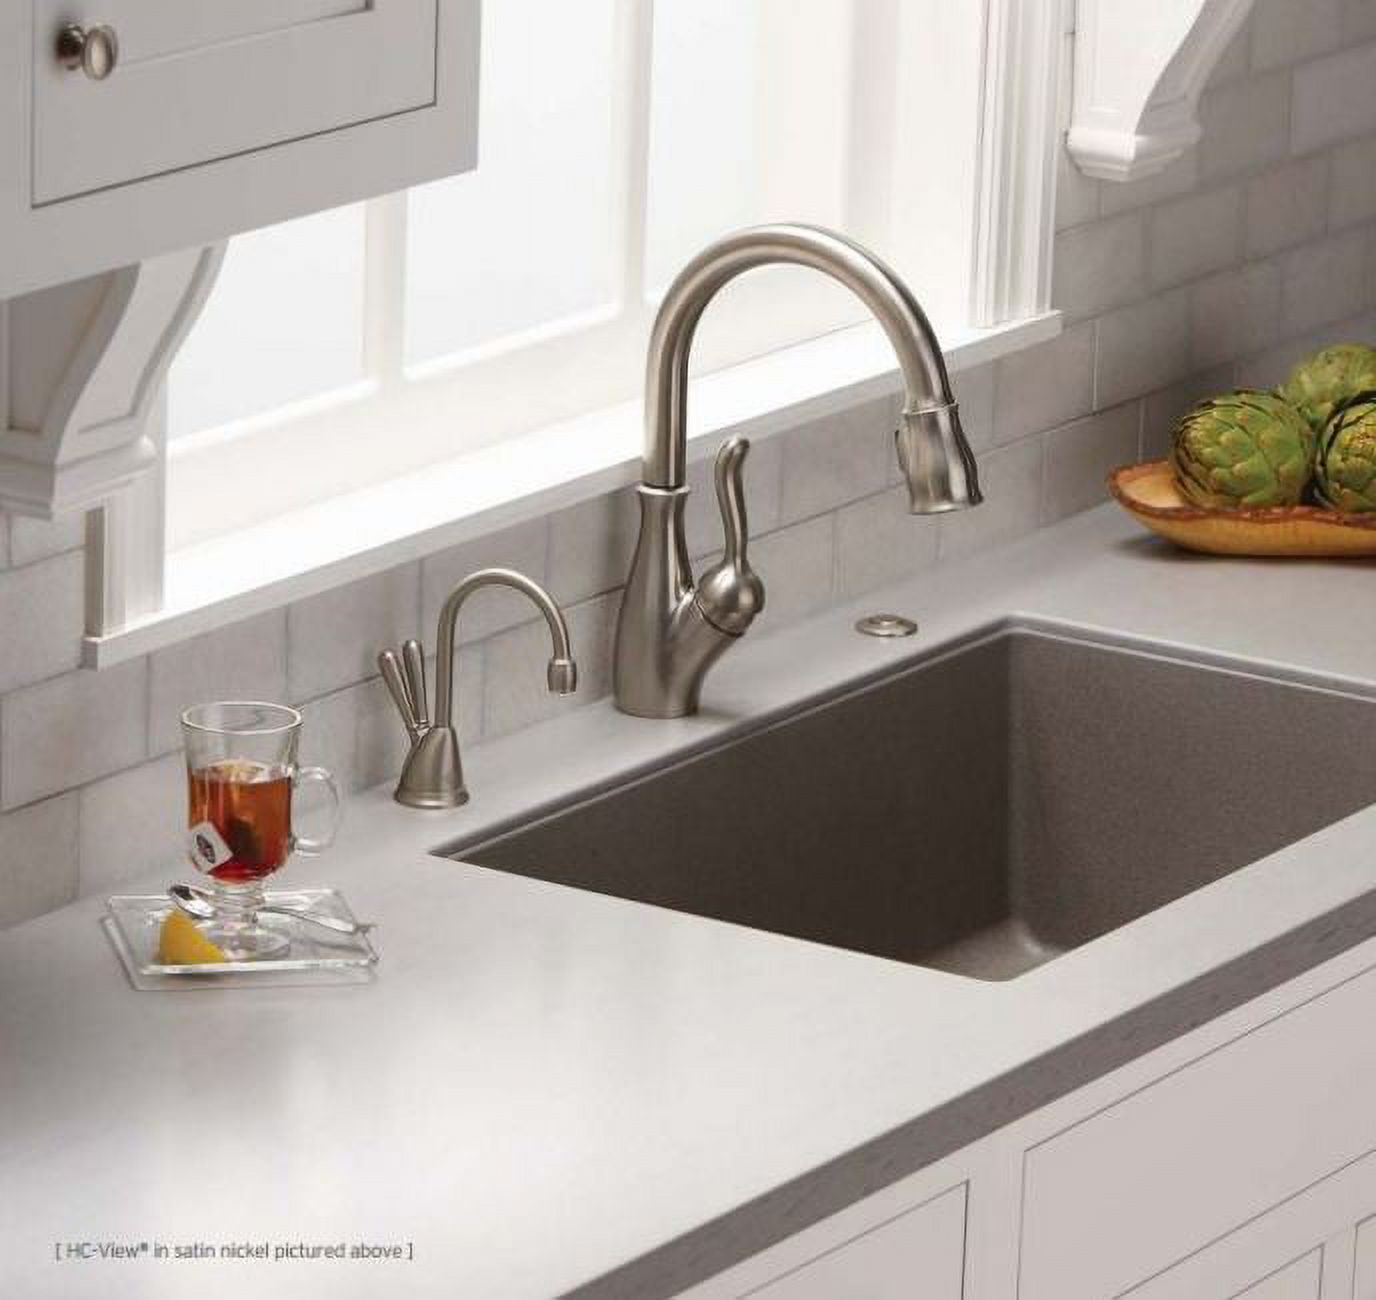 In-Sink-Erator HC-VIEWC-SS Involve HC-View Chrome Instant Hot-Cool Water Dispenser System - image 2 of 4